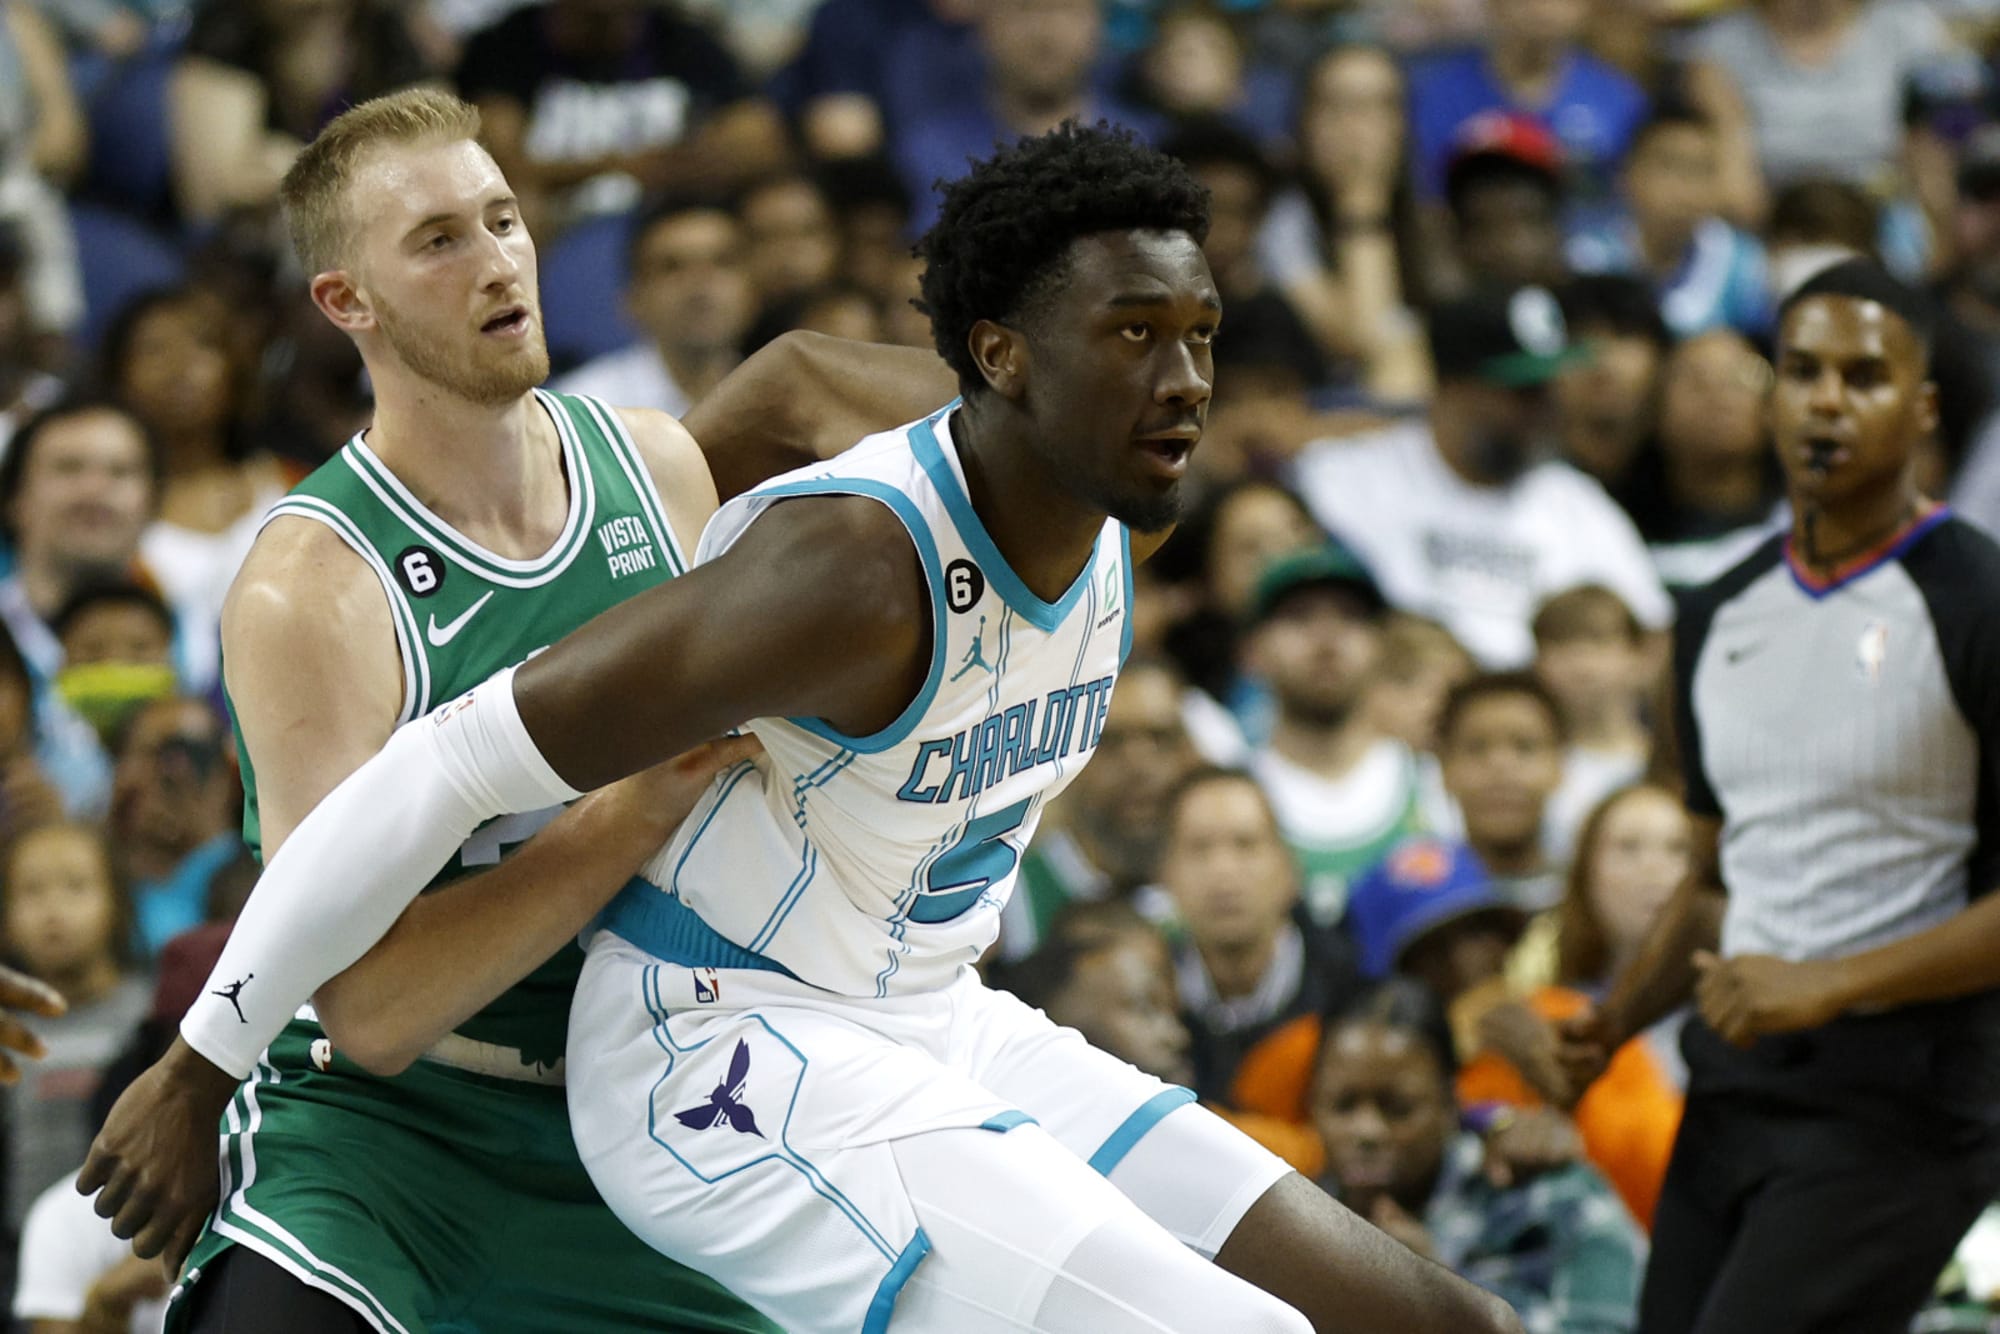 Charlotte Hornets' Mark WIlliams proving to be worth the wait